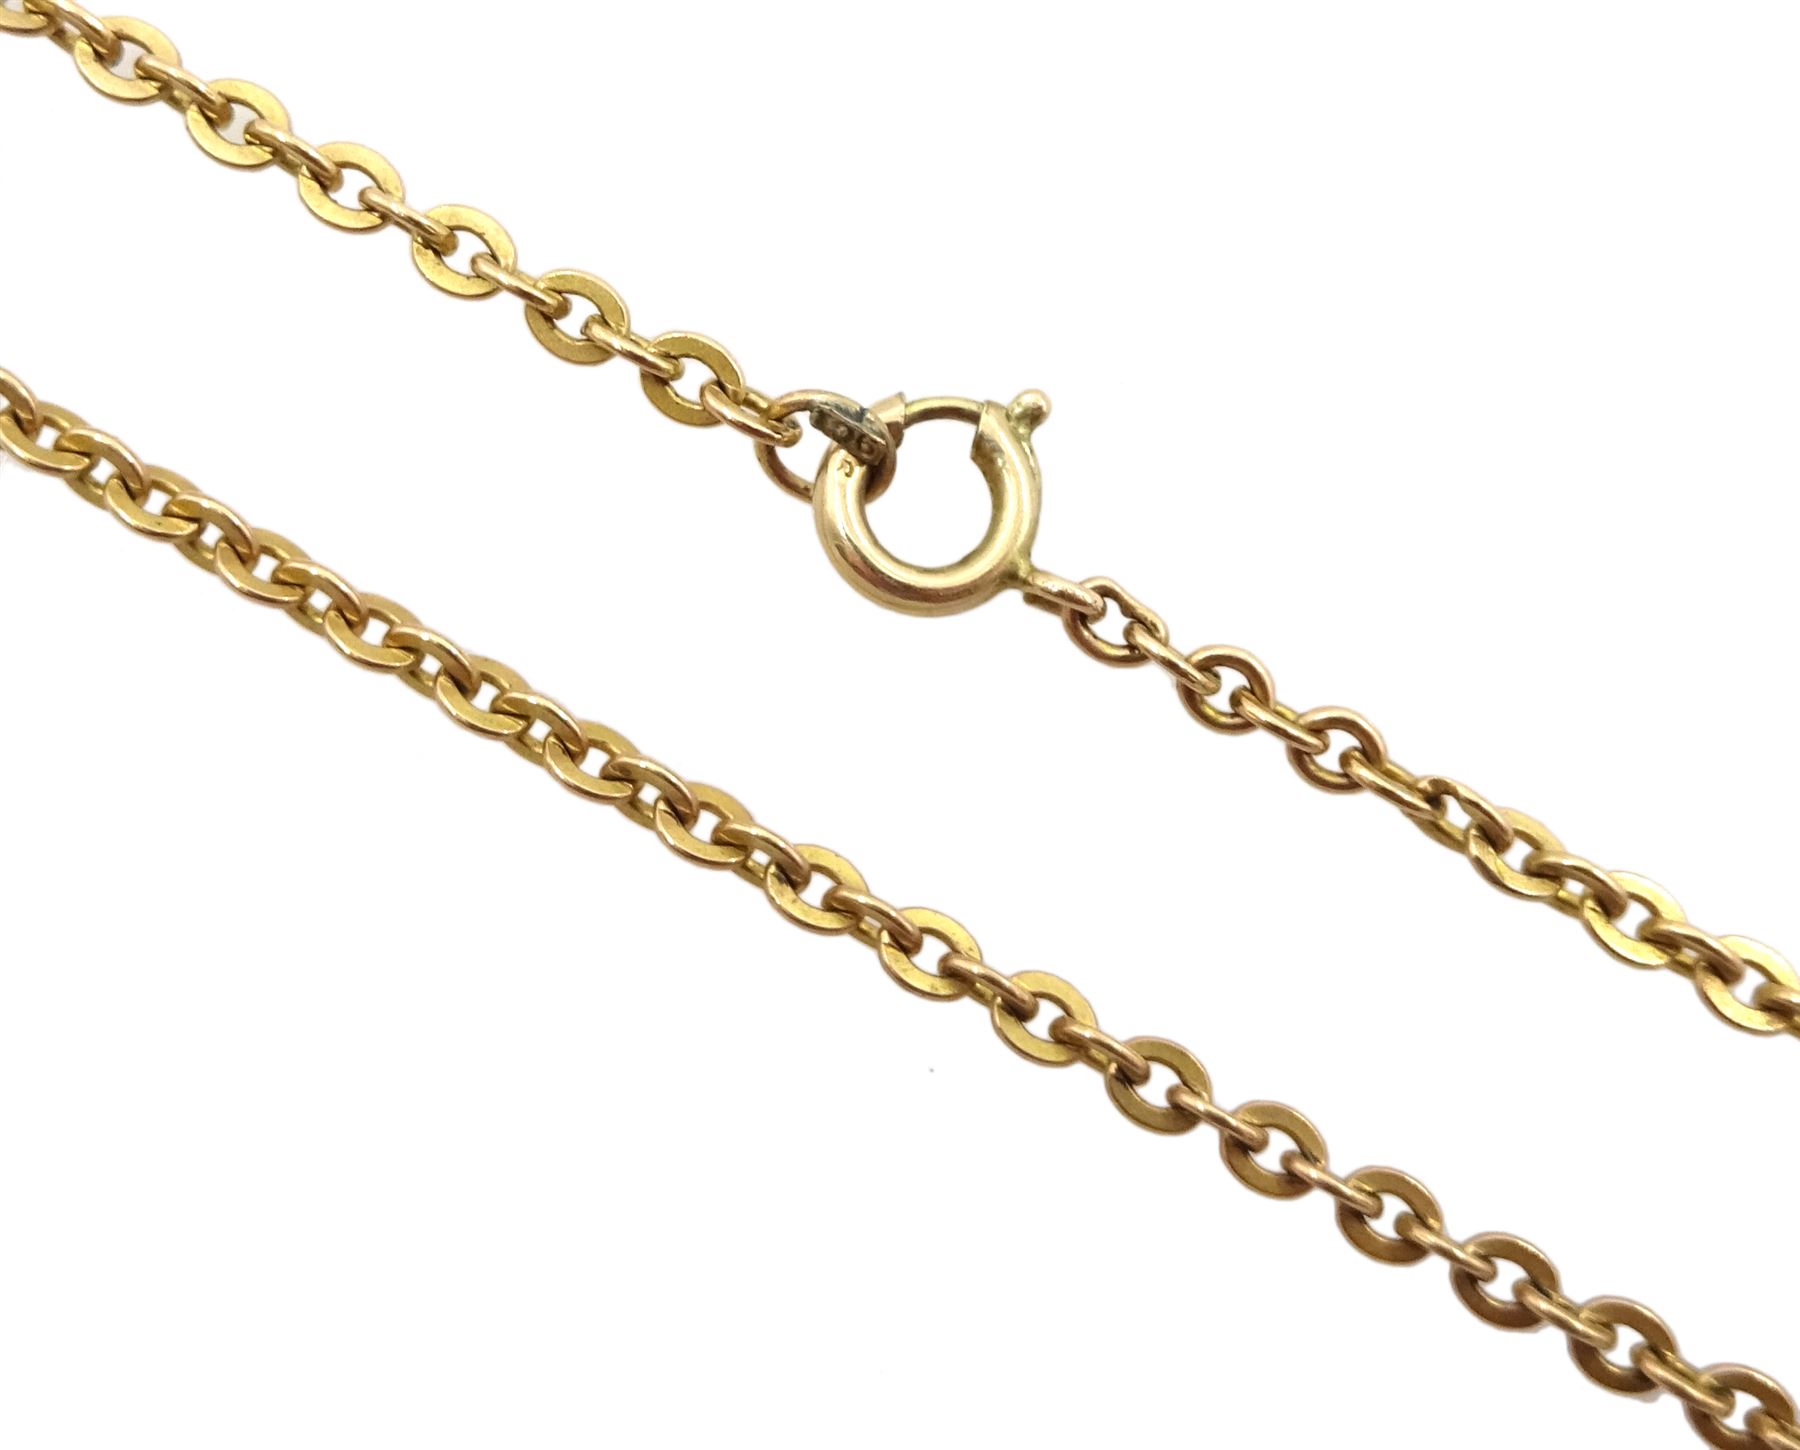 Gold link chain necklace stamped 9ct - Image 2 of 3